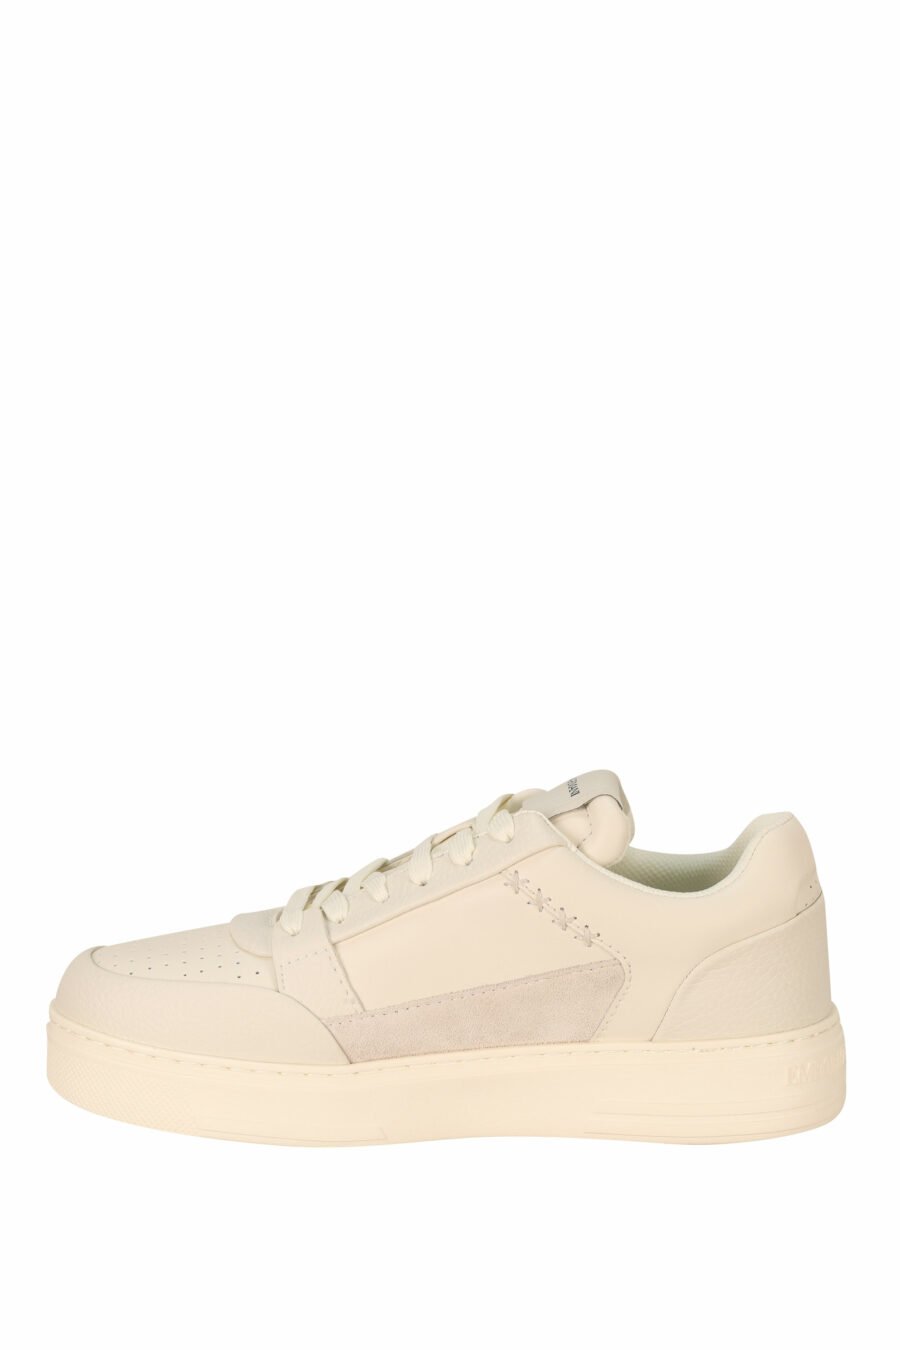 White trainers mixed with beige and rubber mini-logo - 8058947169122 2